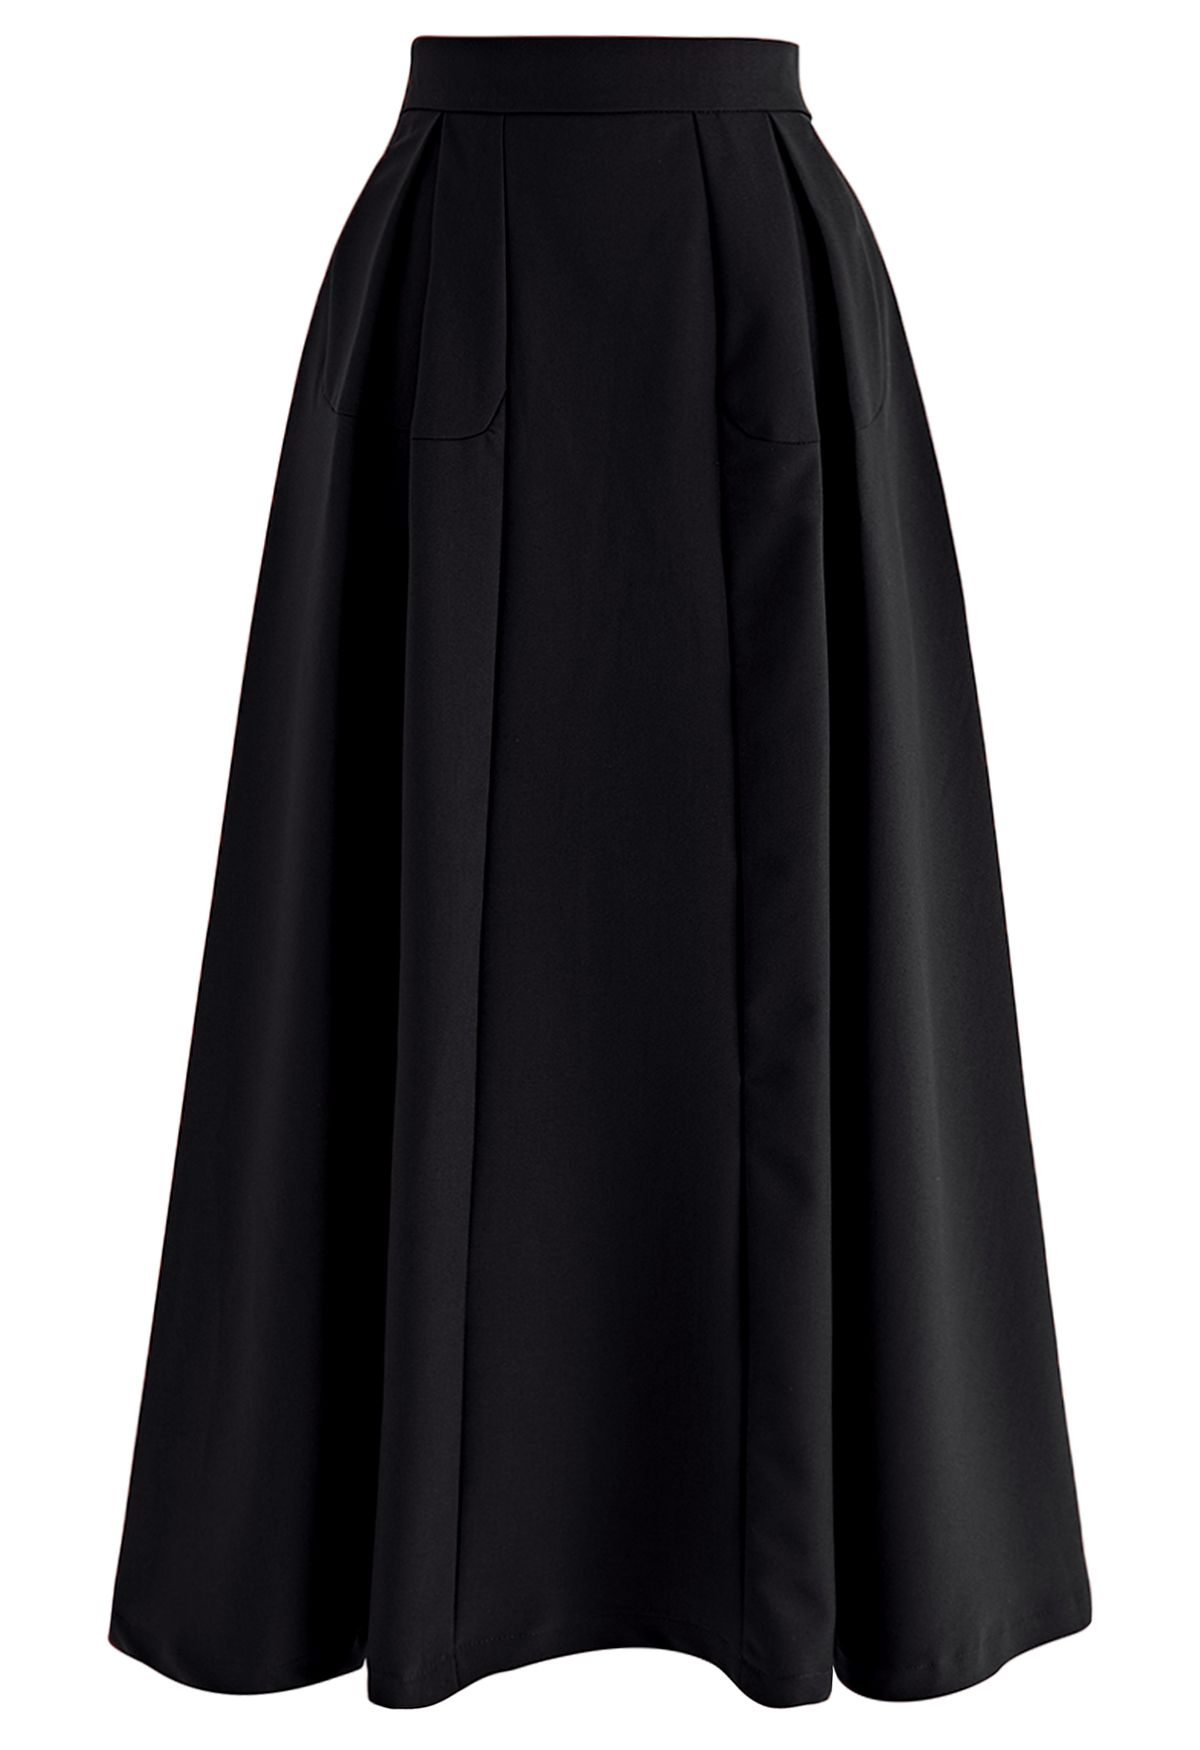 Seam Detailing Pleated A-Line Skirt in Black - Retro, Indie and Unique ...